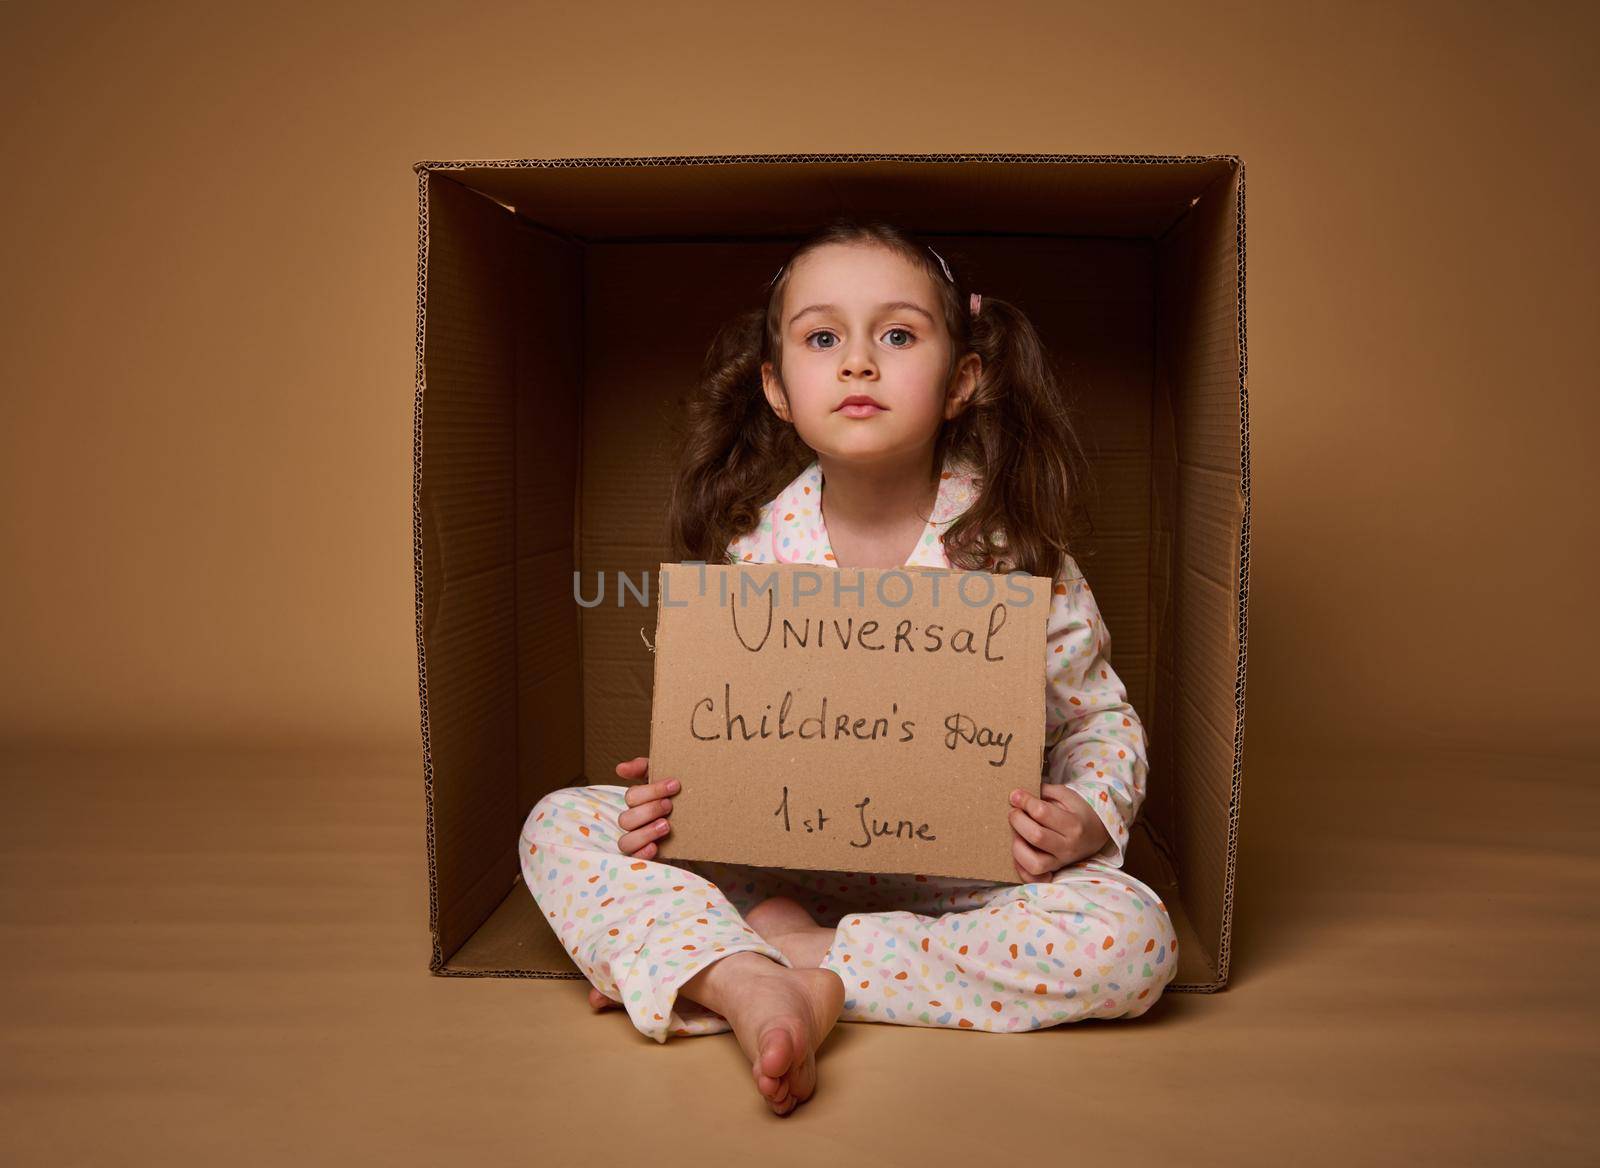 International Children's Day. Social advertising, information campaign for the fight for children's rights. Cute little girl with two ponytails holding cardboard poster sitting inside a cardboard box.